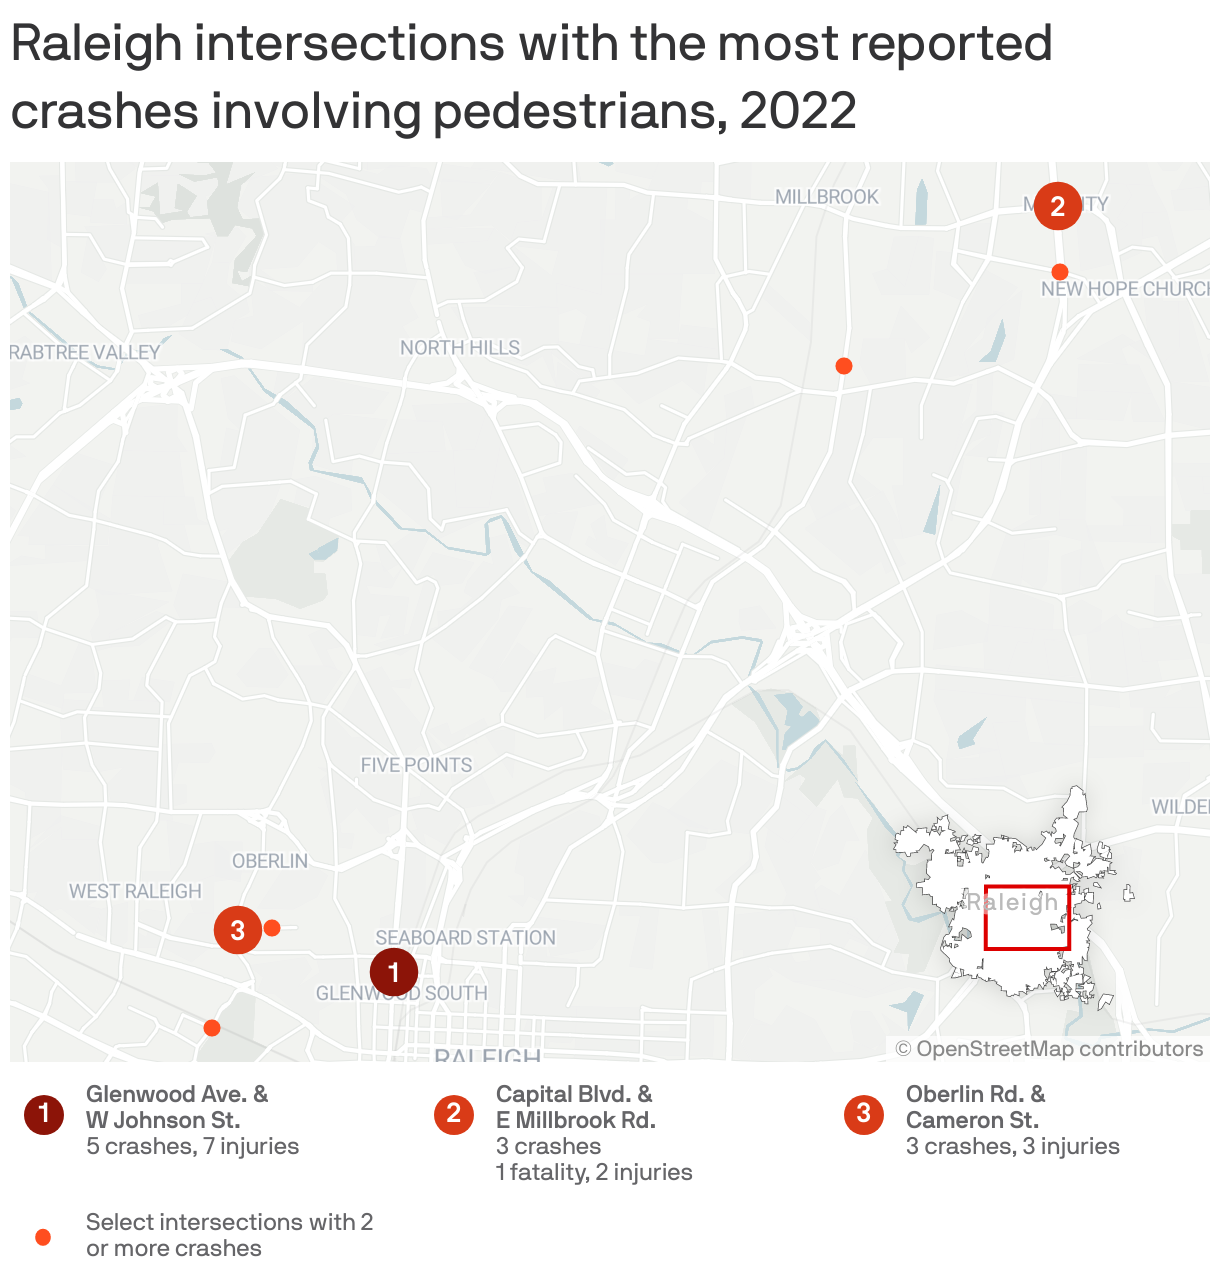 Raleigh intersections with the most reported crashes involving pedestrians, 2022